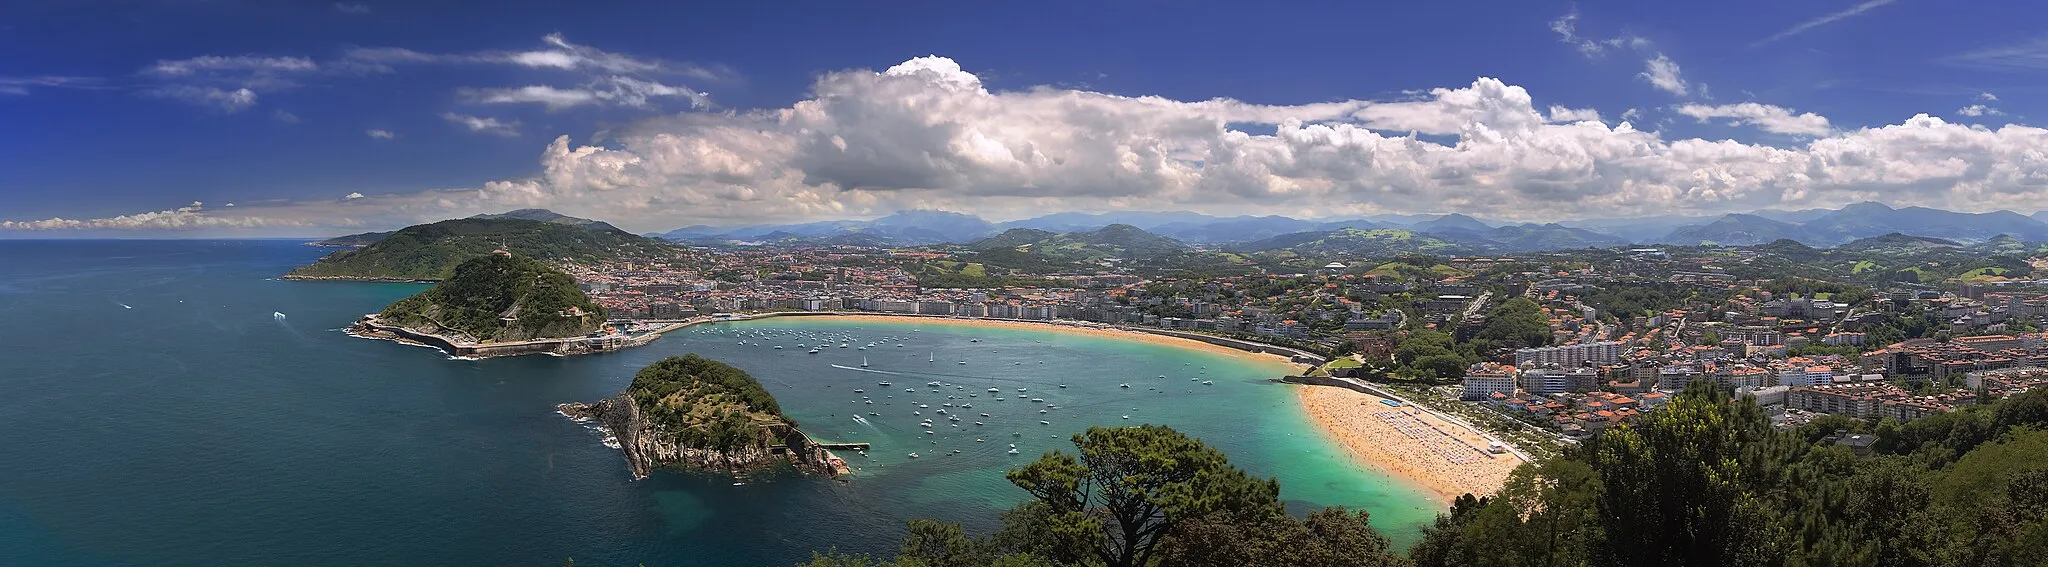 Photo showing: The city of Donostia from top of mount Igeldo.